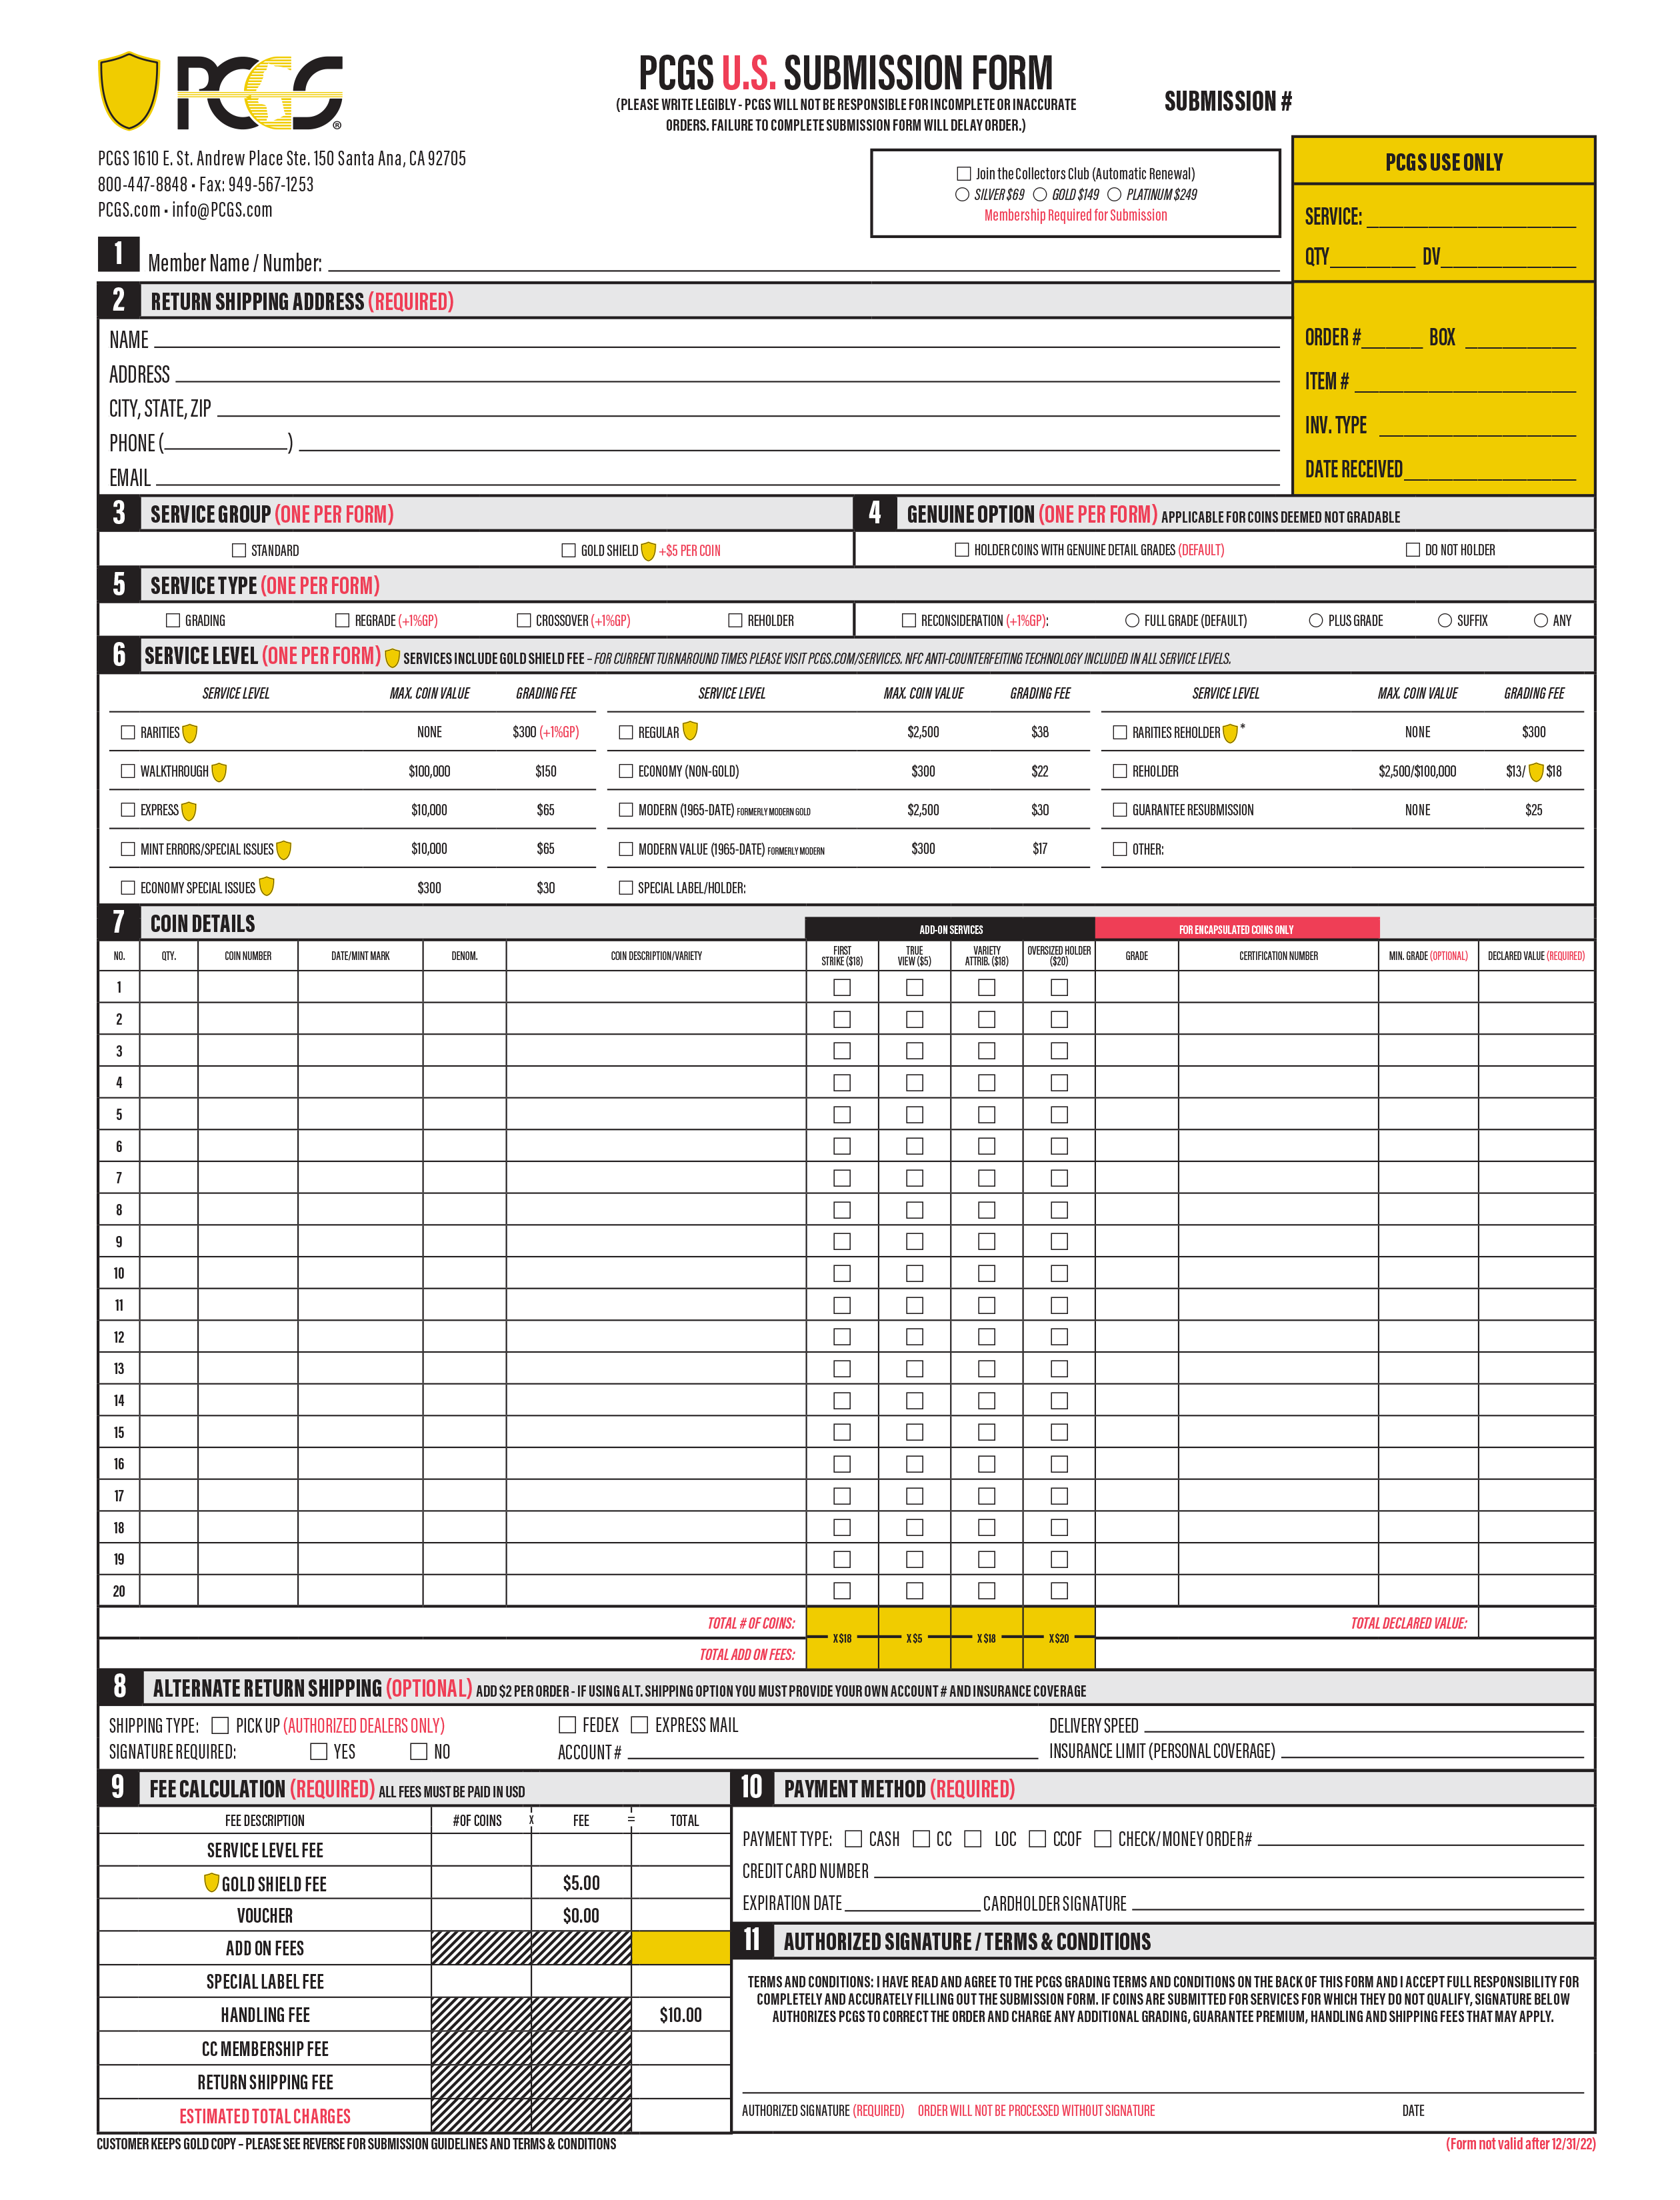 PCGS Submission Form